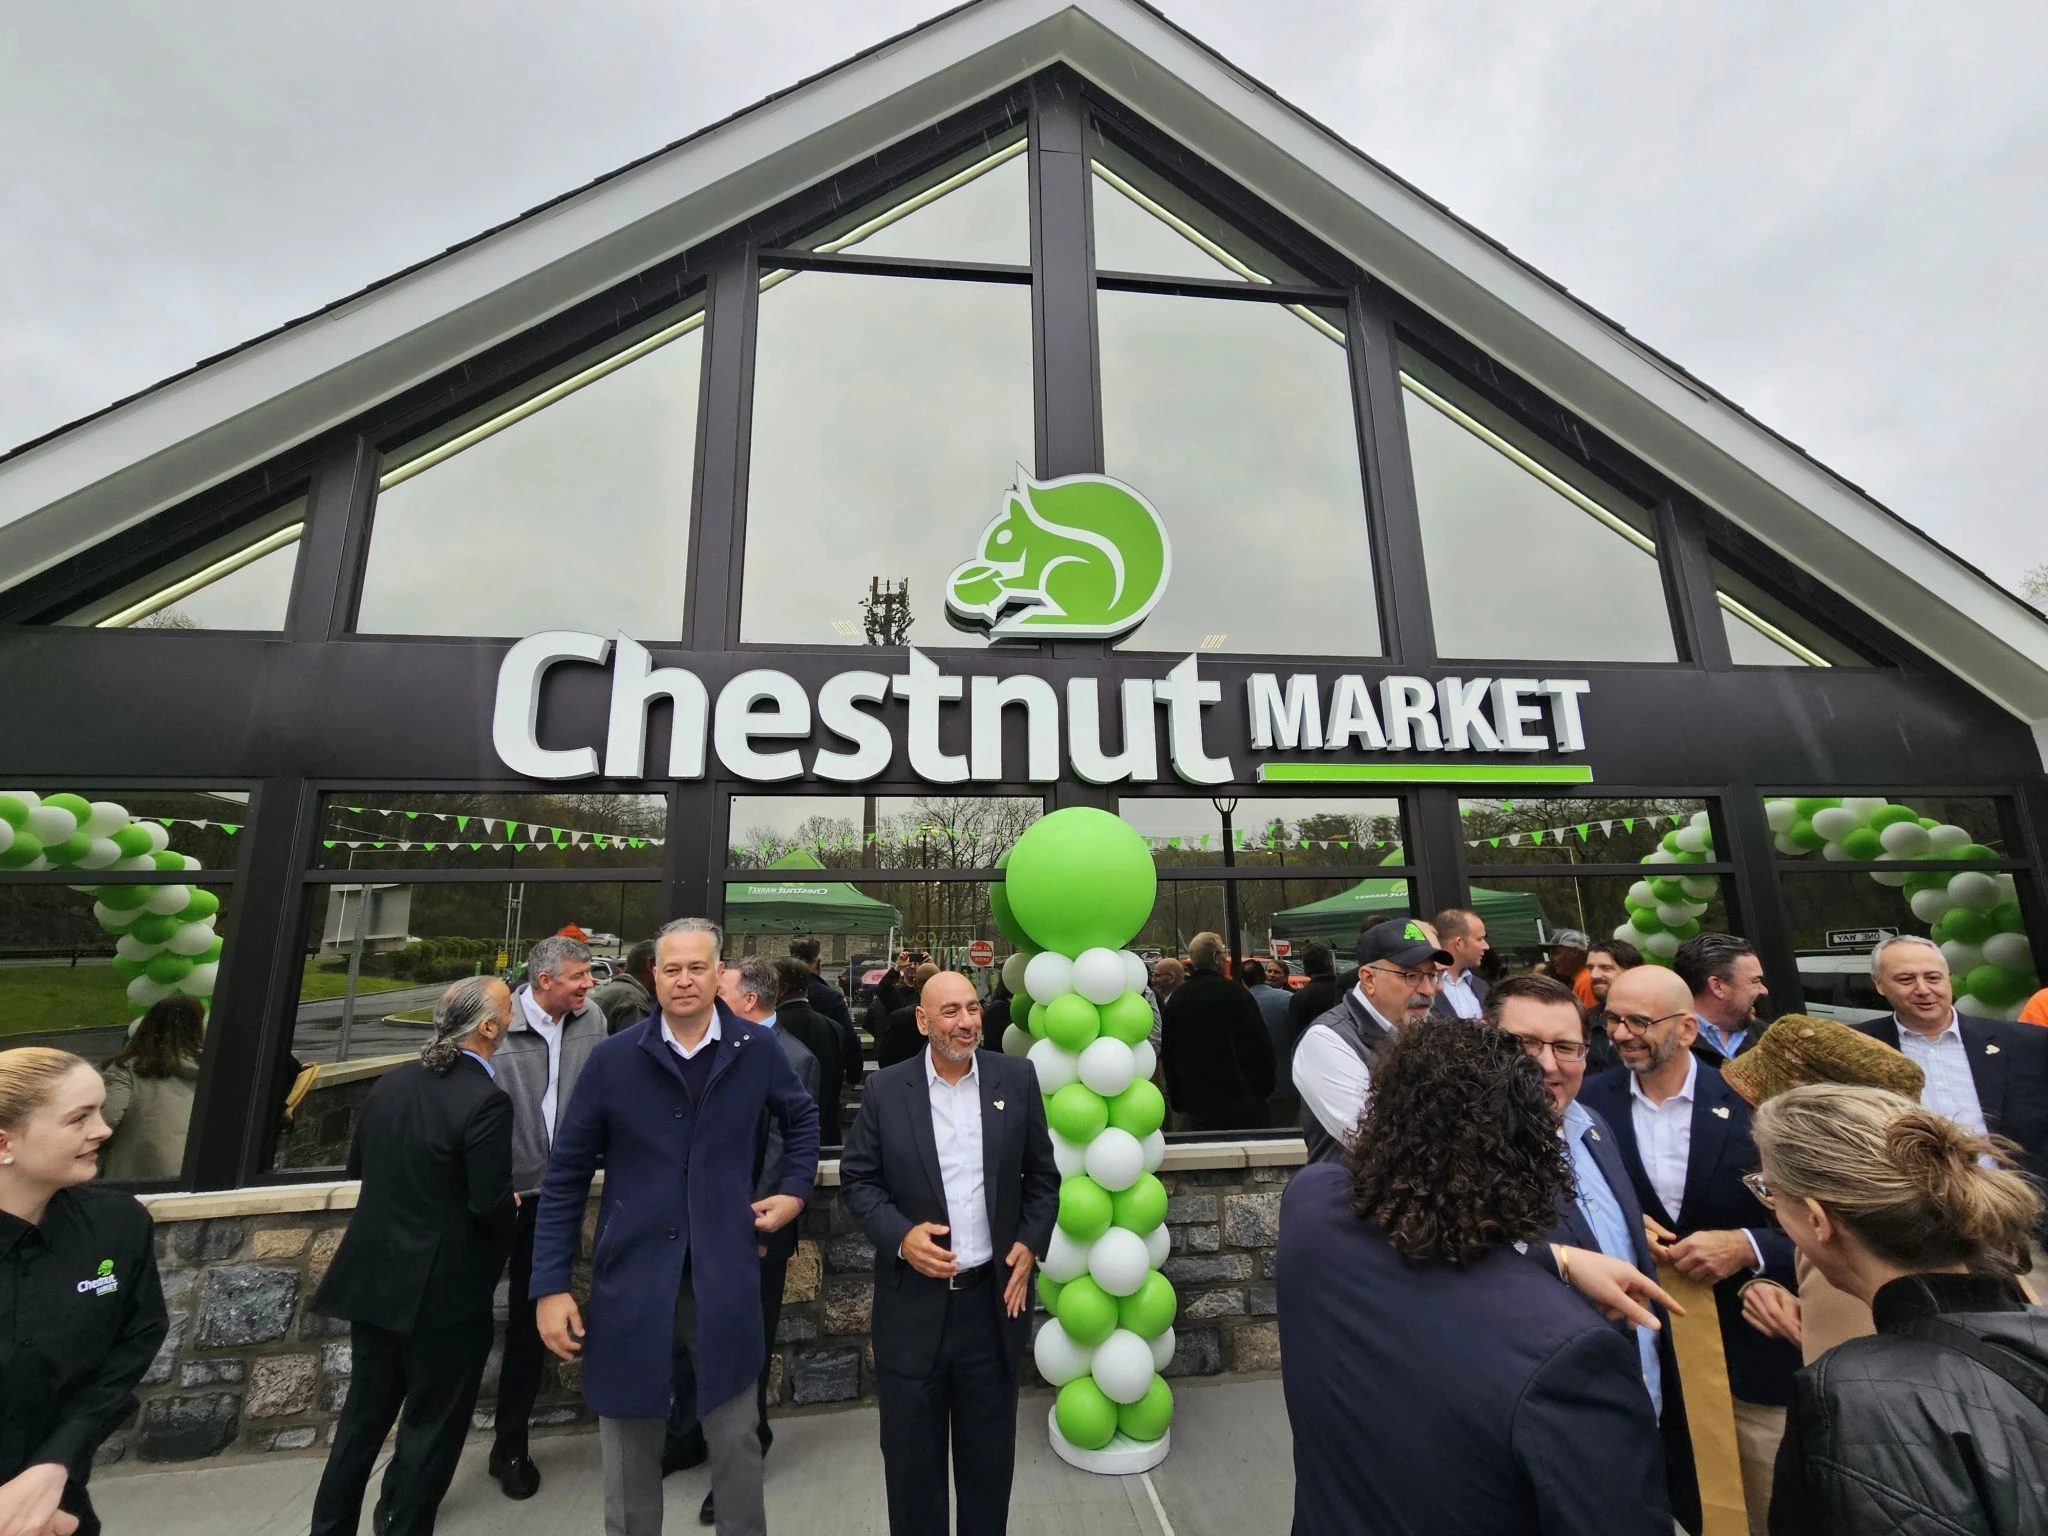 Launch day at Chestnut Market